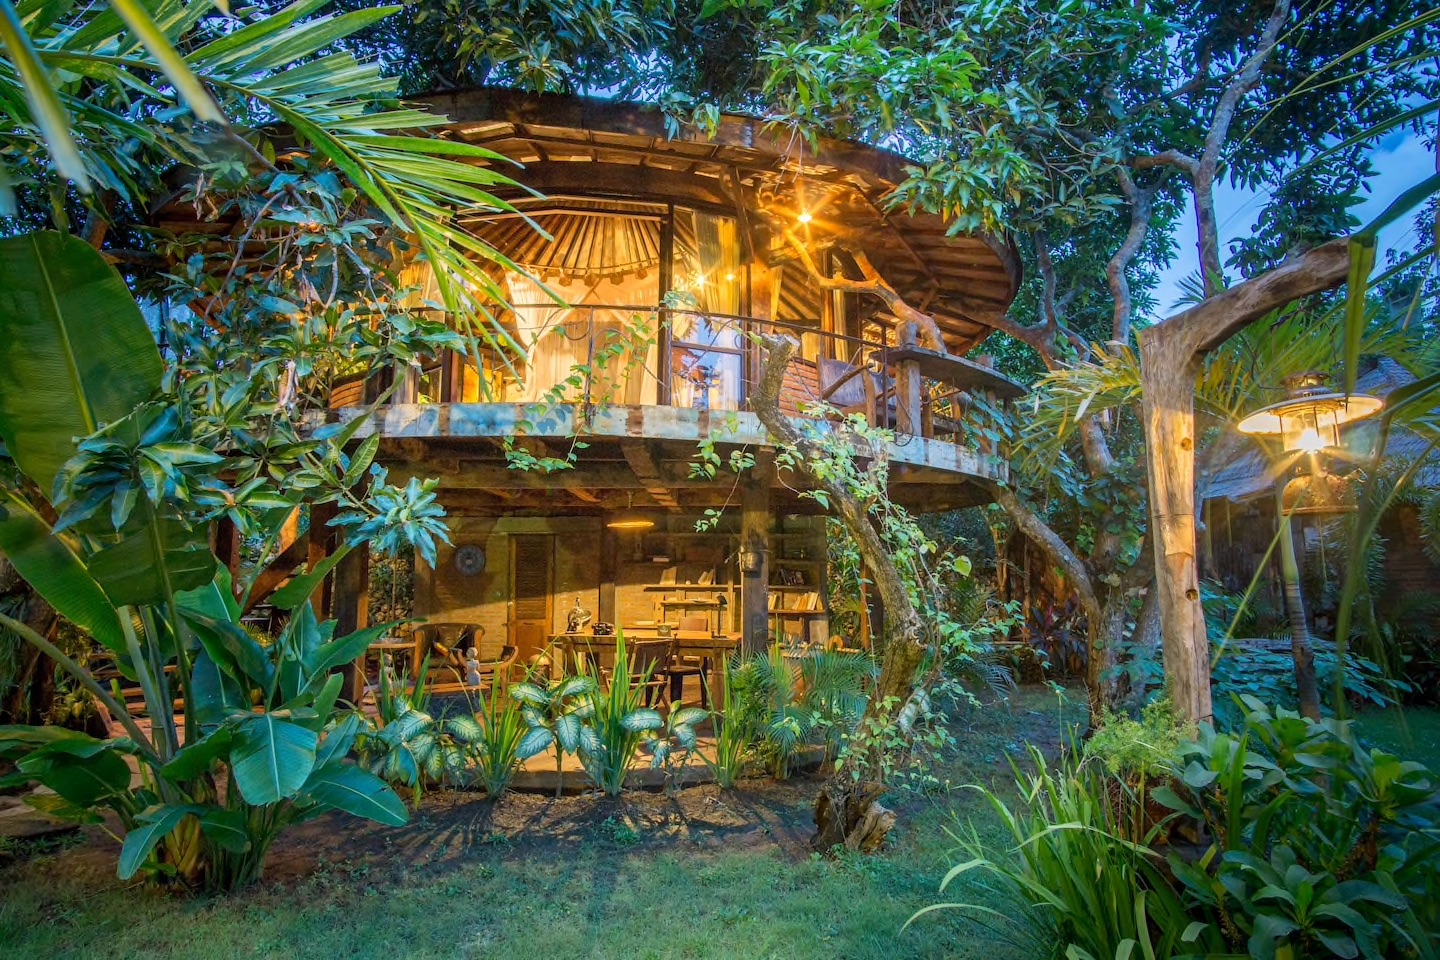 Best AirBnB in Bali, Most Unique AirBnB in Bali by www.calmctravels.com